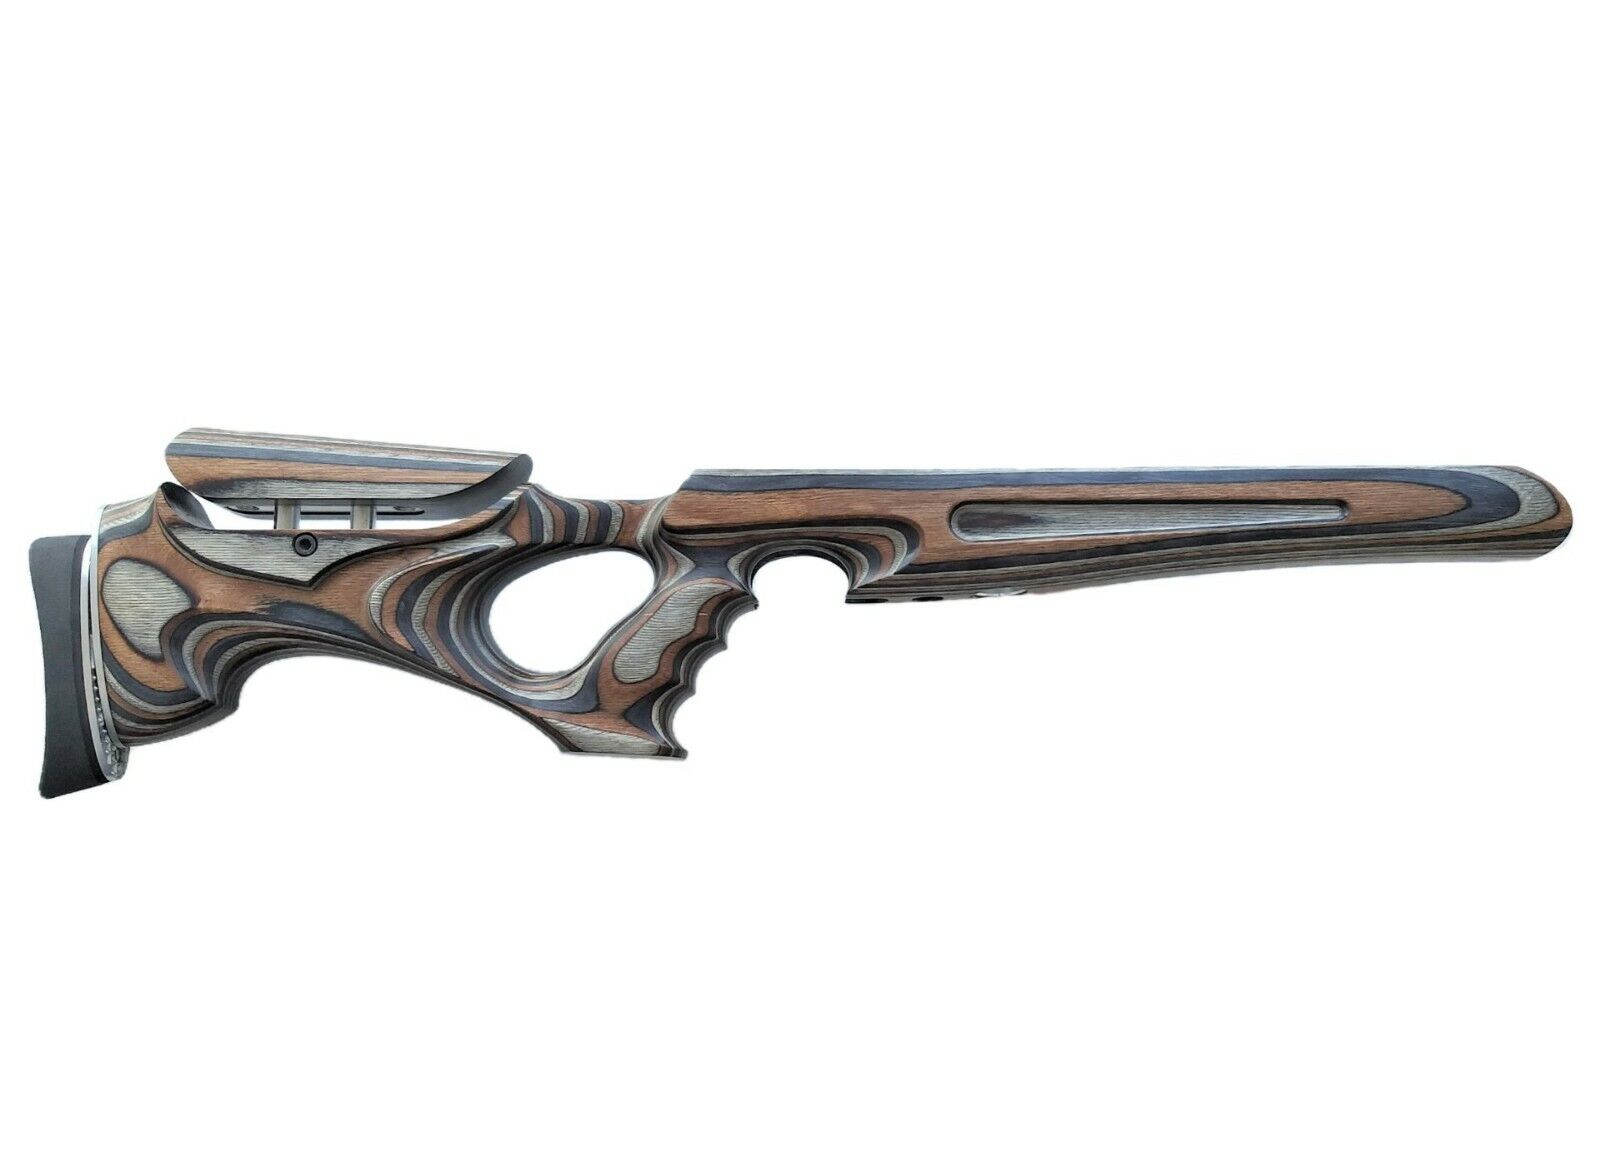 Mountain camo laminated custom stock for Air Arms S400/500 series